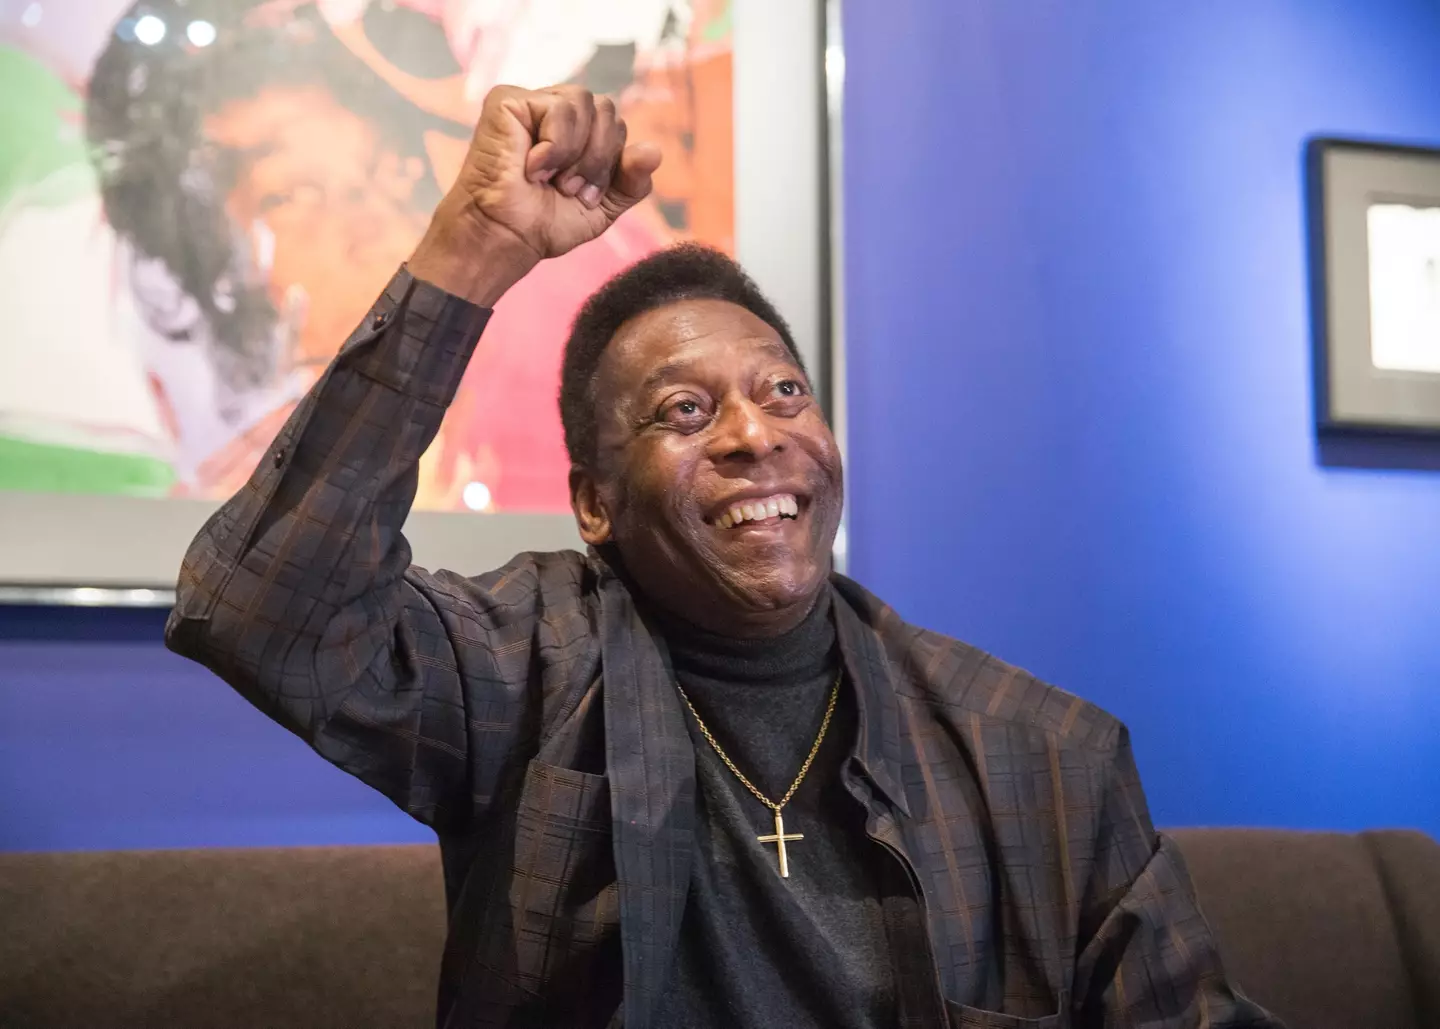 Pele shared an update on his health after reports claimed he was receiving end of life care.